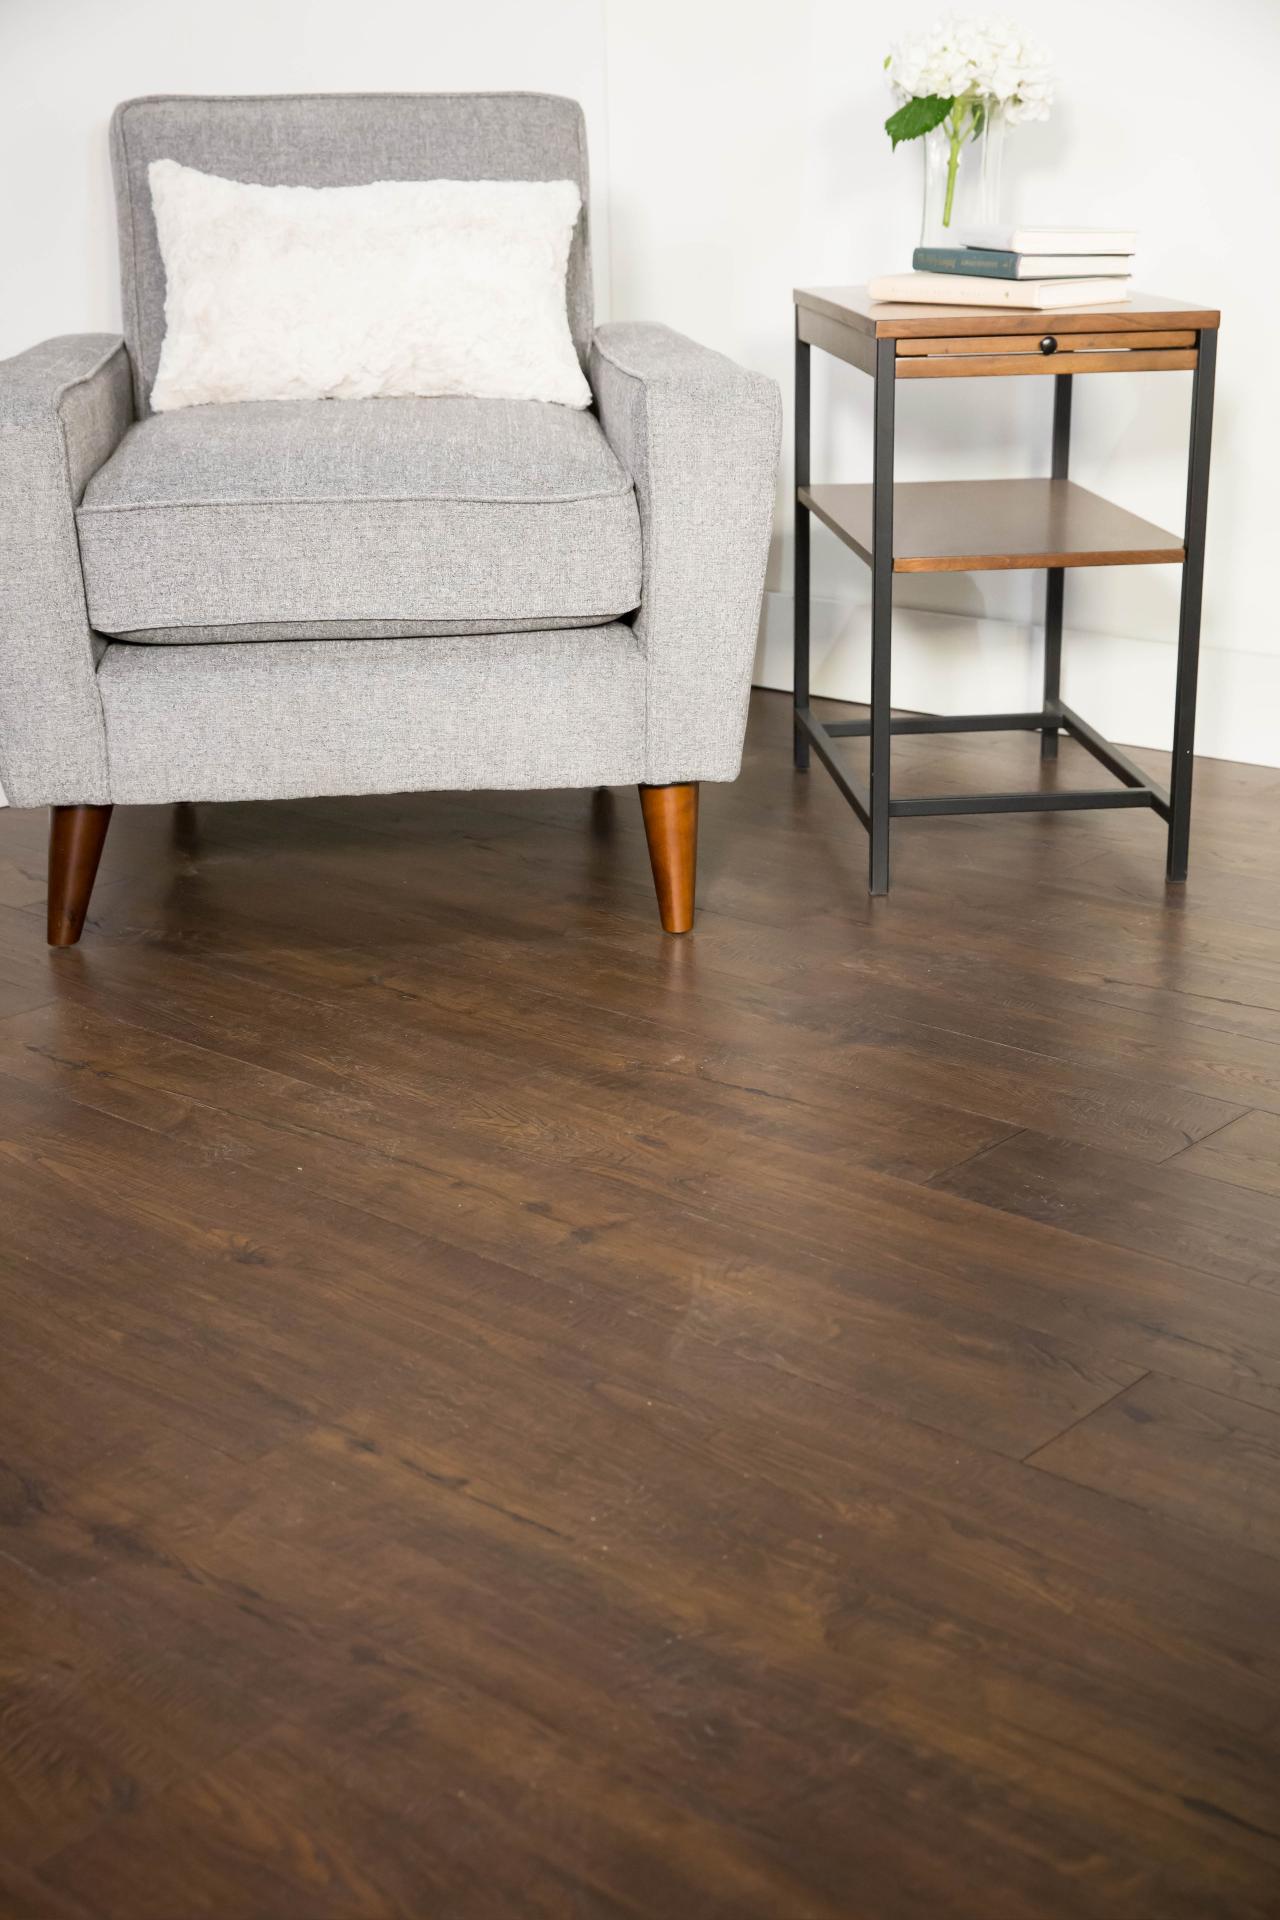 How To Install A Laminate Floor, How To Install Laminate Flooring In Living Room